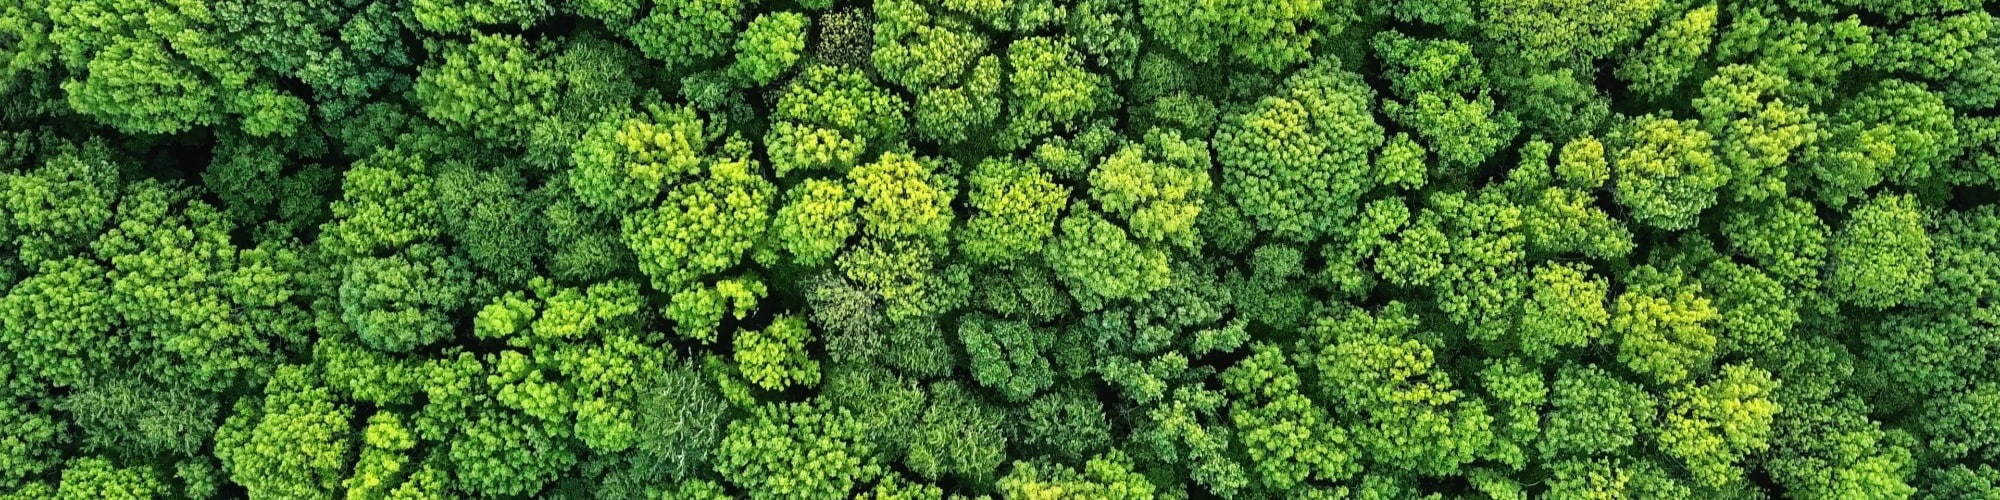 Picture of green trees from above